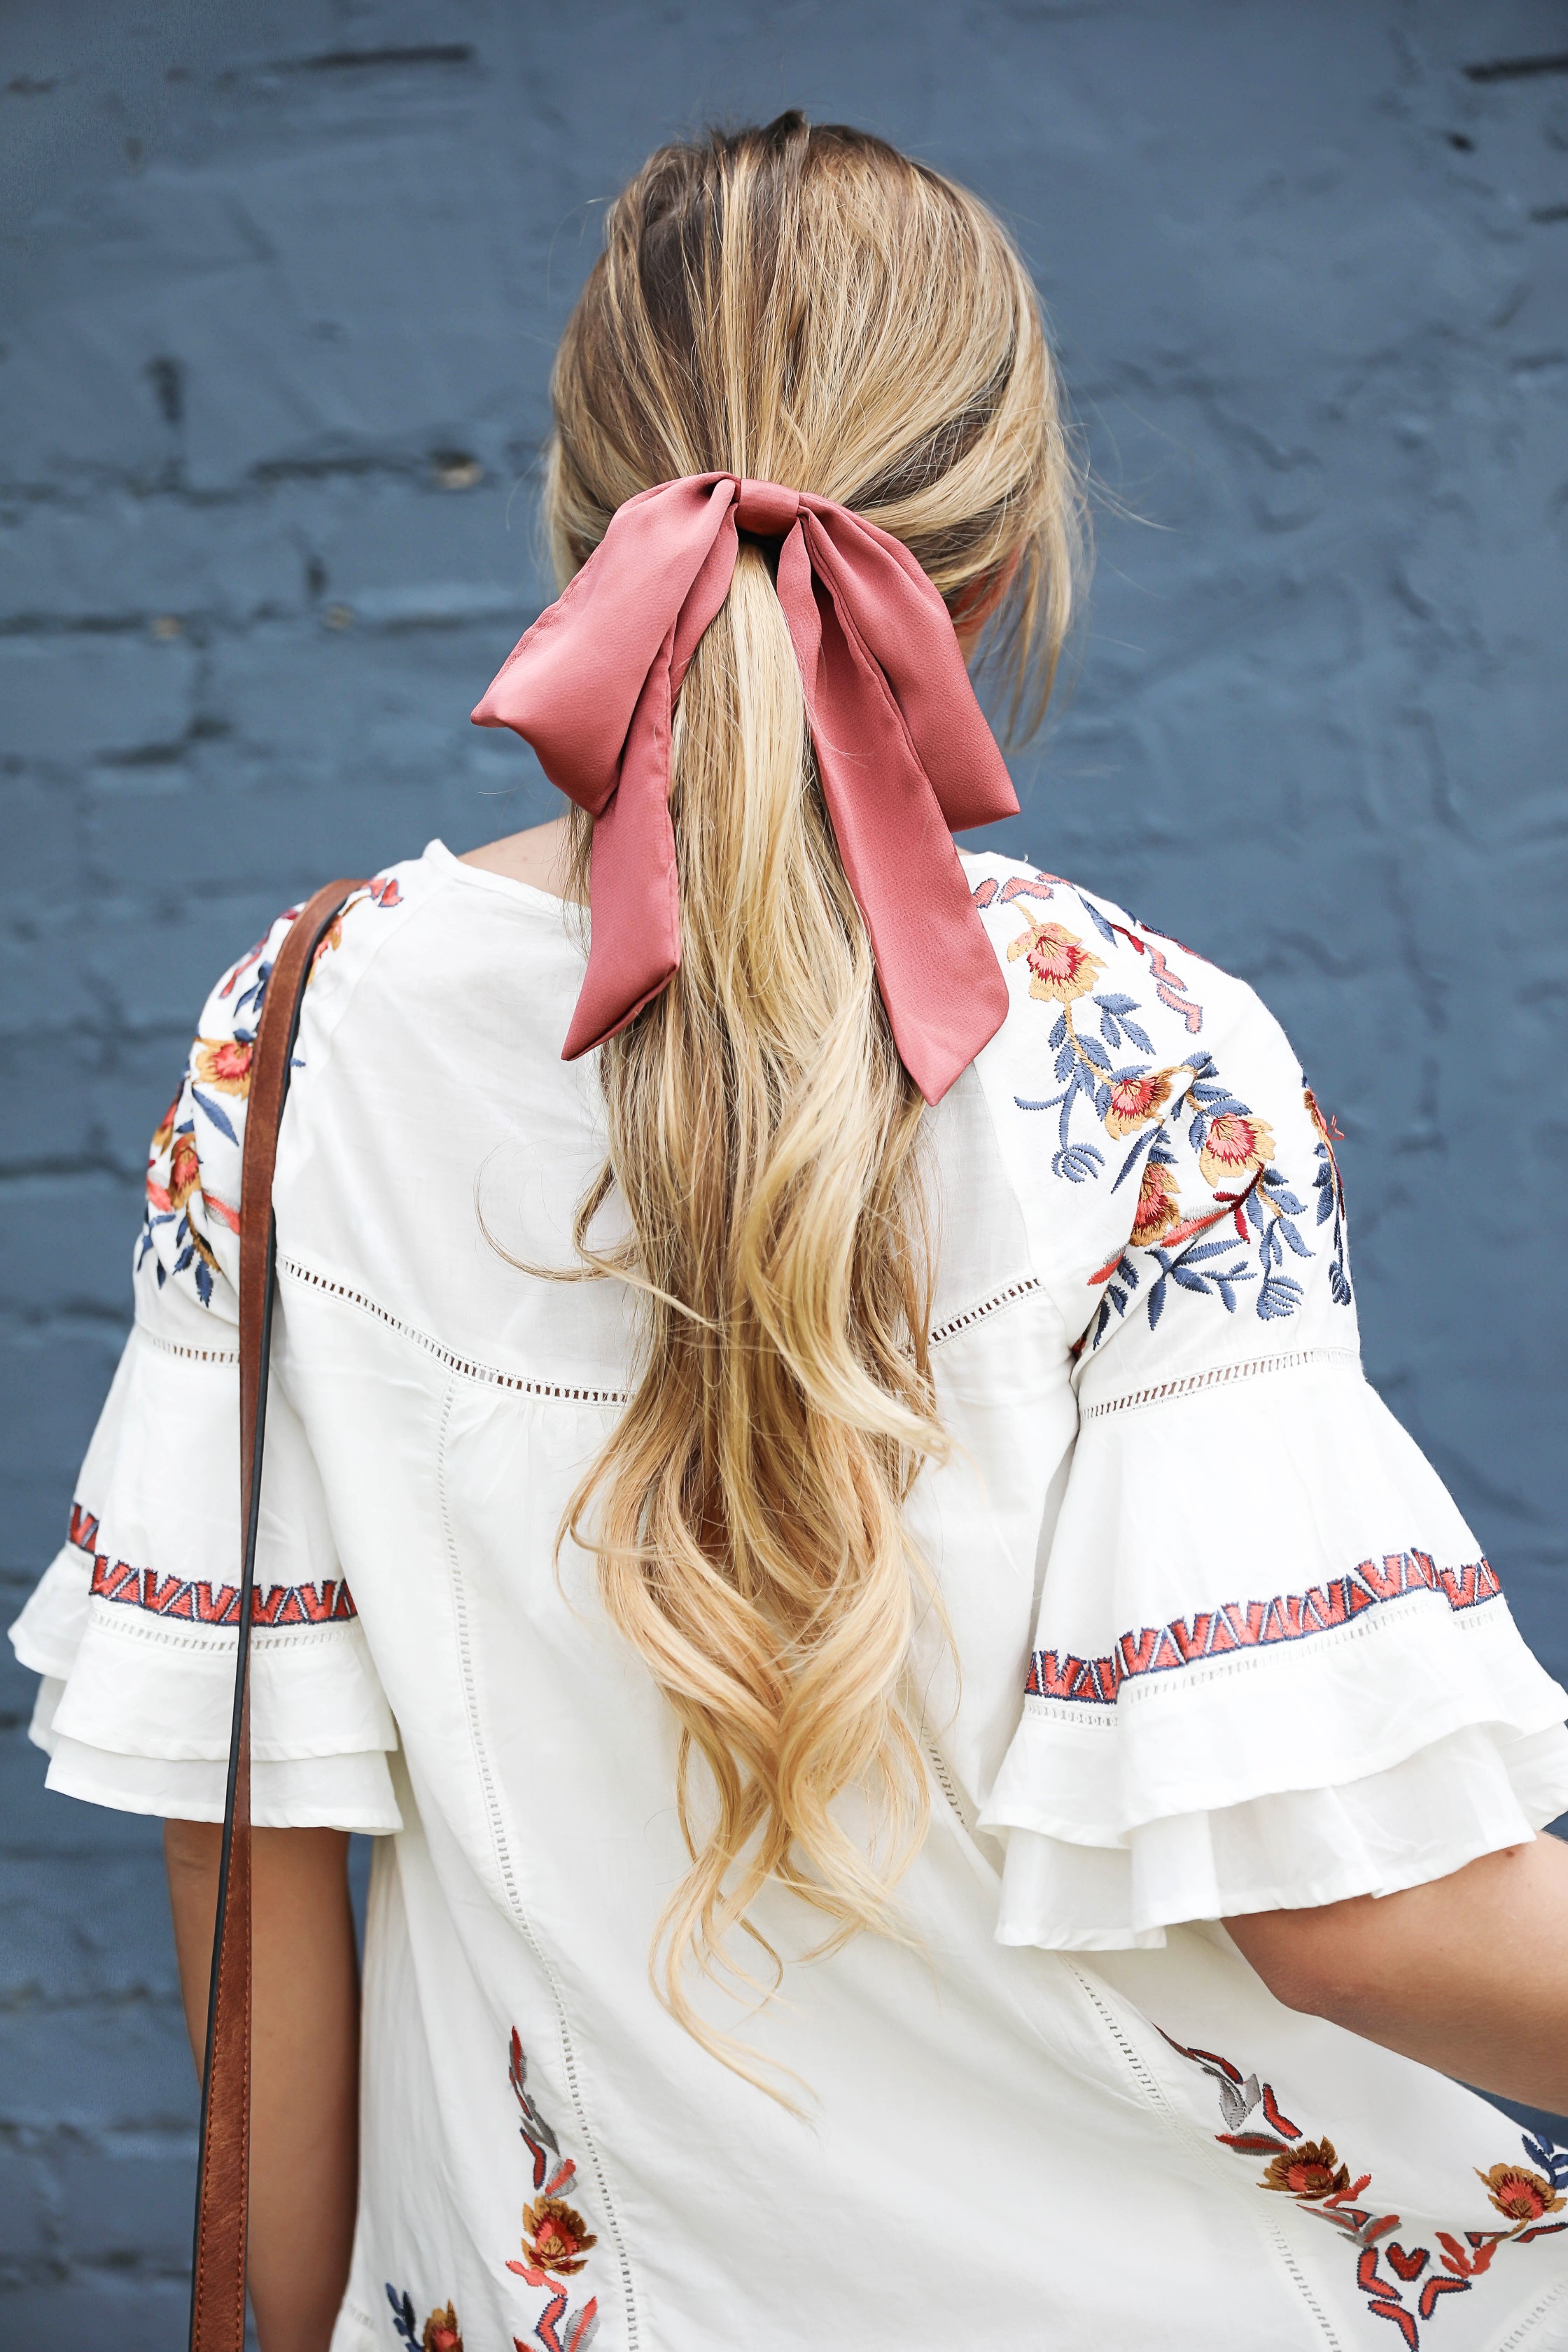 Free People embrodiered white dress for summer! I paired this adorable summer dress with a mauve hair bow and saddle bag by sole society! I love my hair in a ponytail with a bow, hair scarves are so in right now! Details on fashion blog by daily dose of charm by lauren lindmark